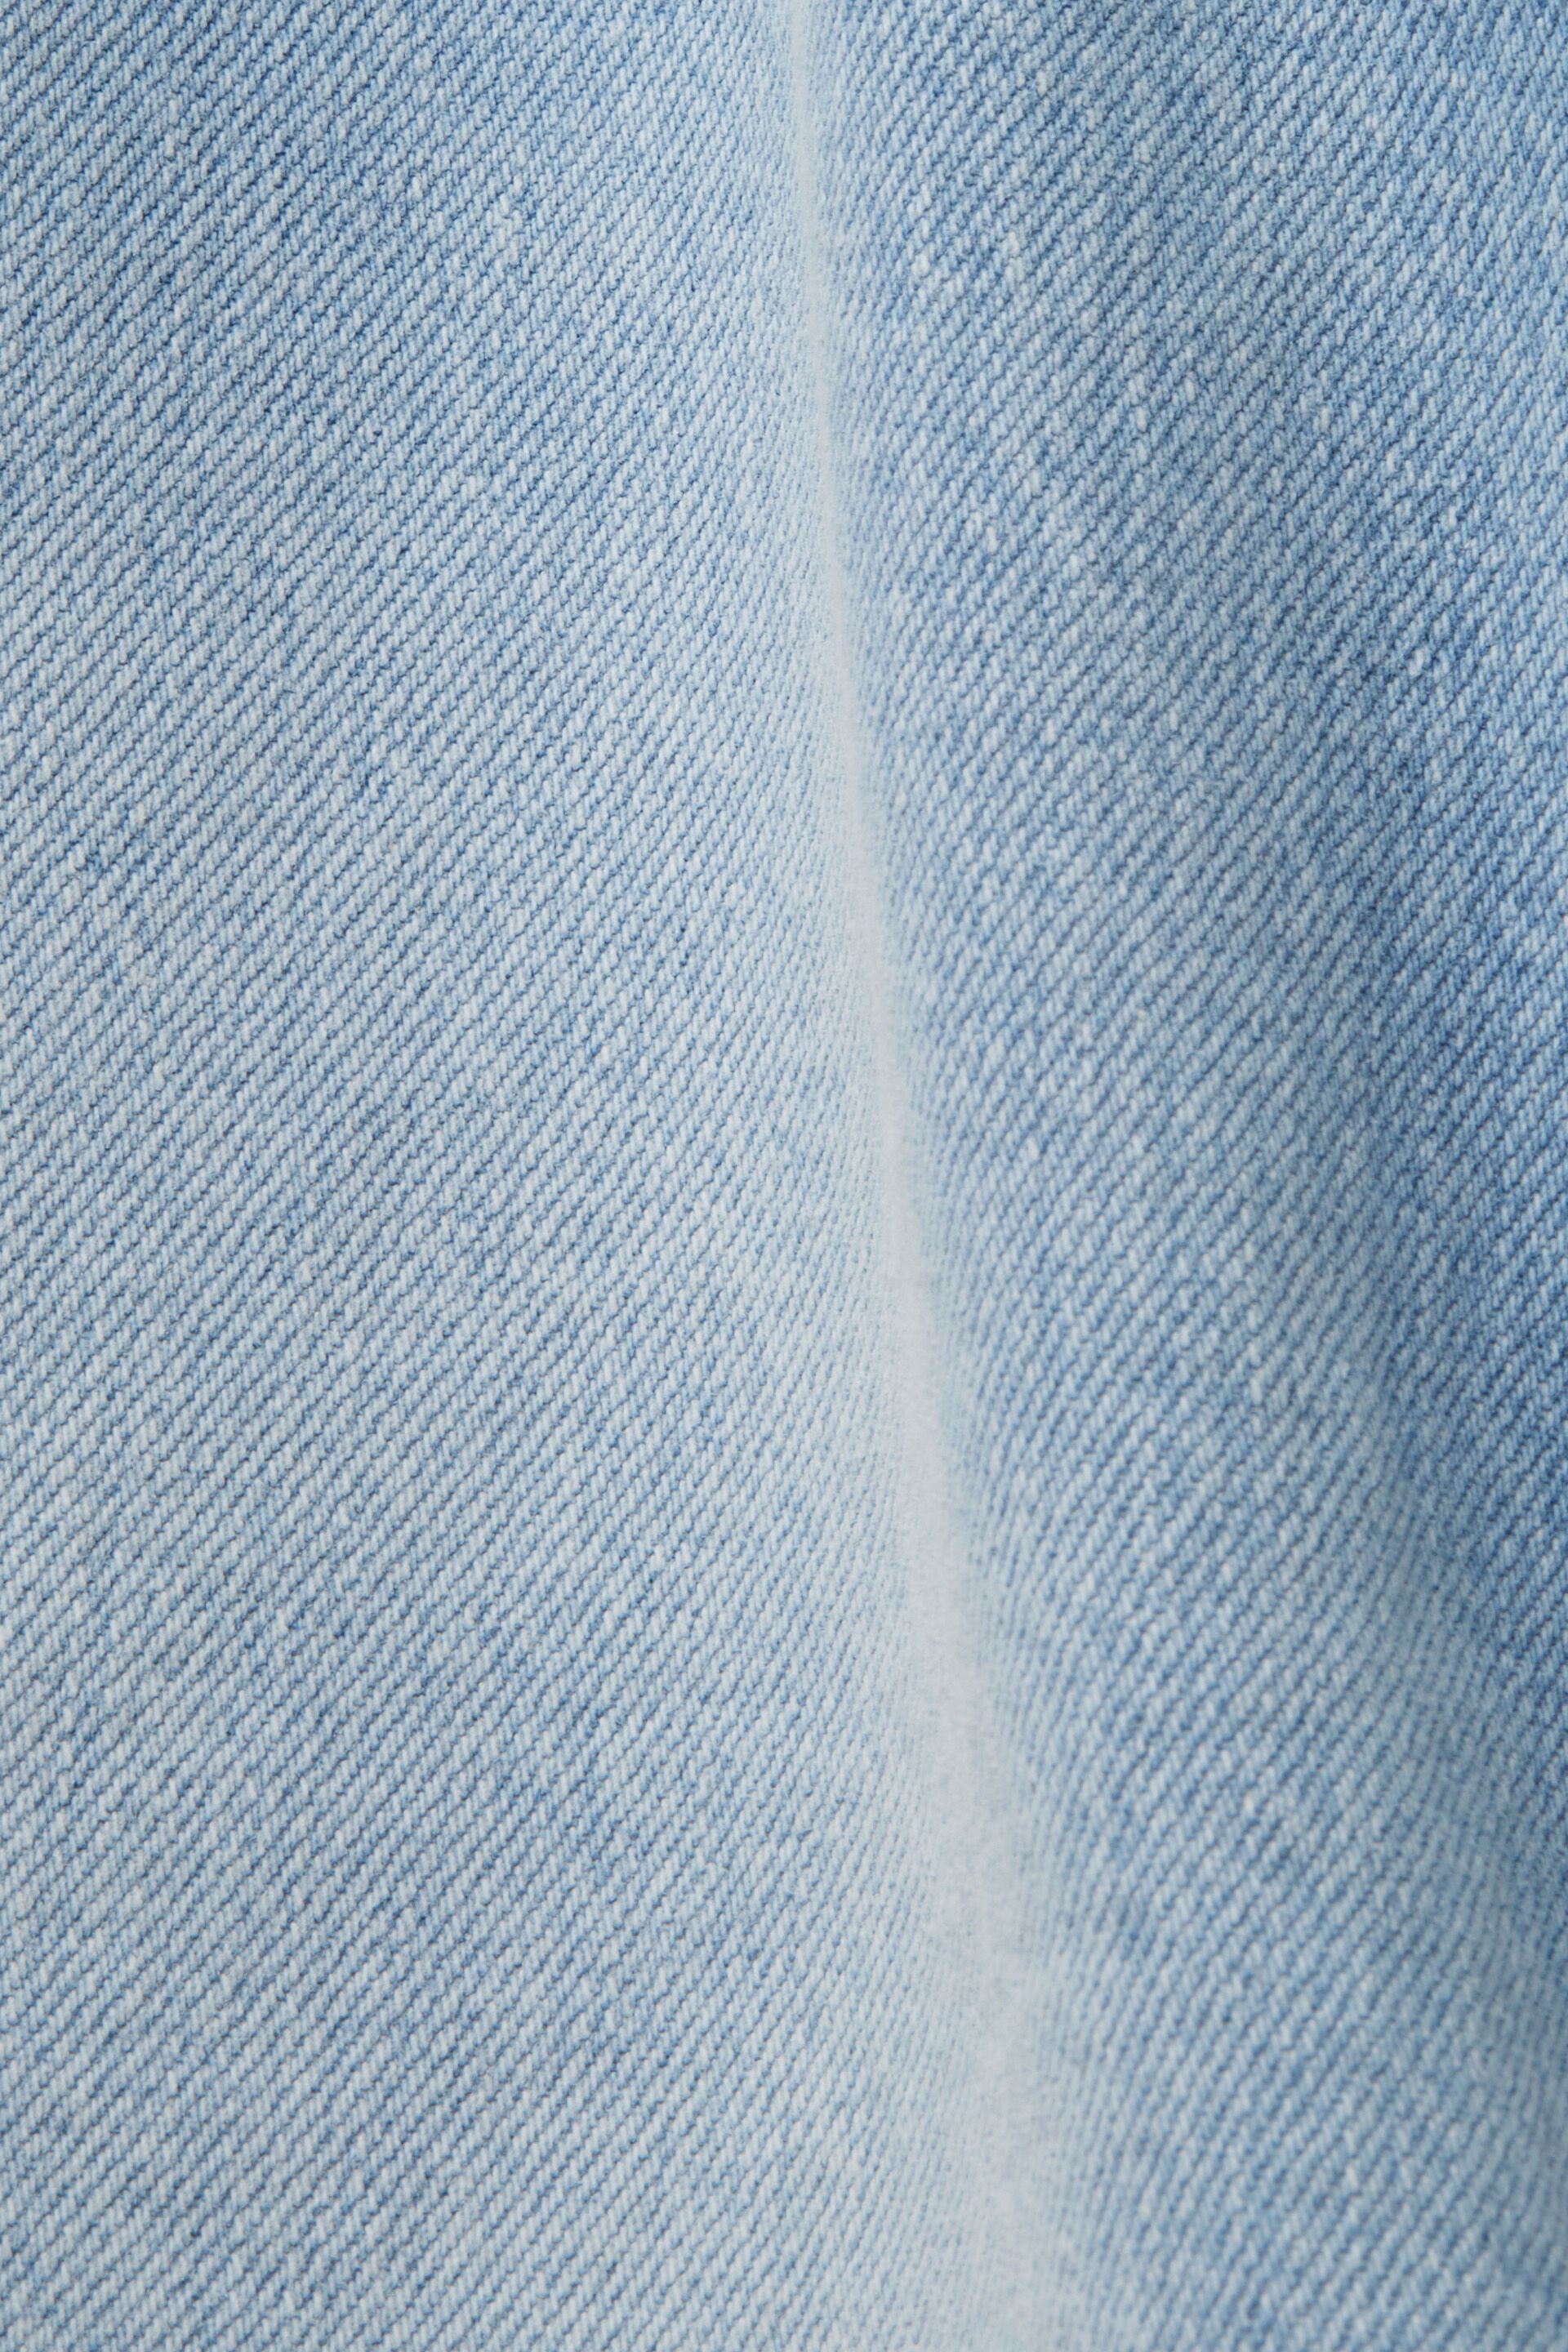 Denim blue jeans texture close up background top view canvas prints for the  wall • canvas prints macro, detail, empty | myloview.com